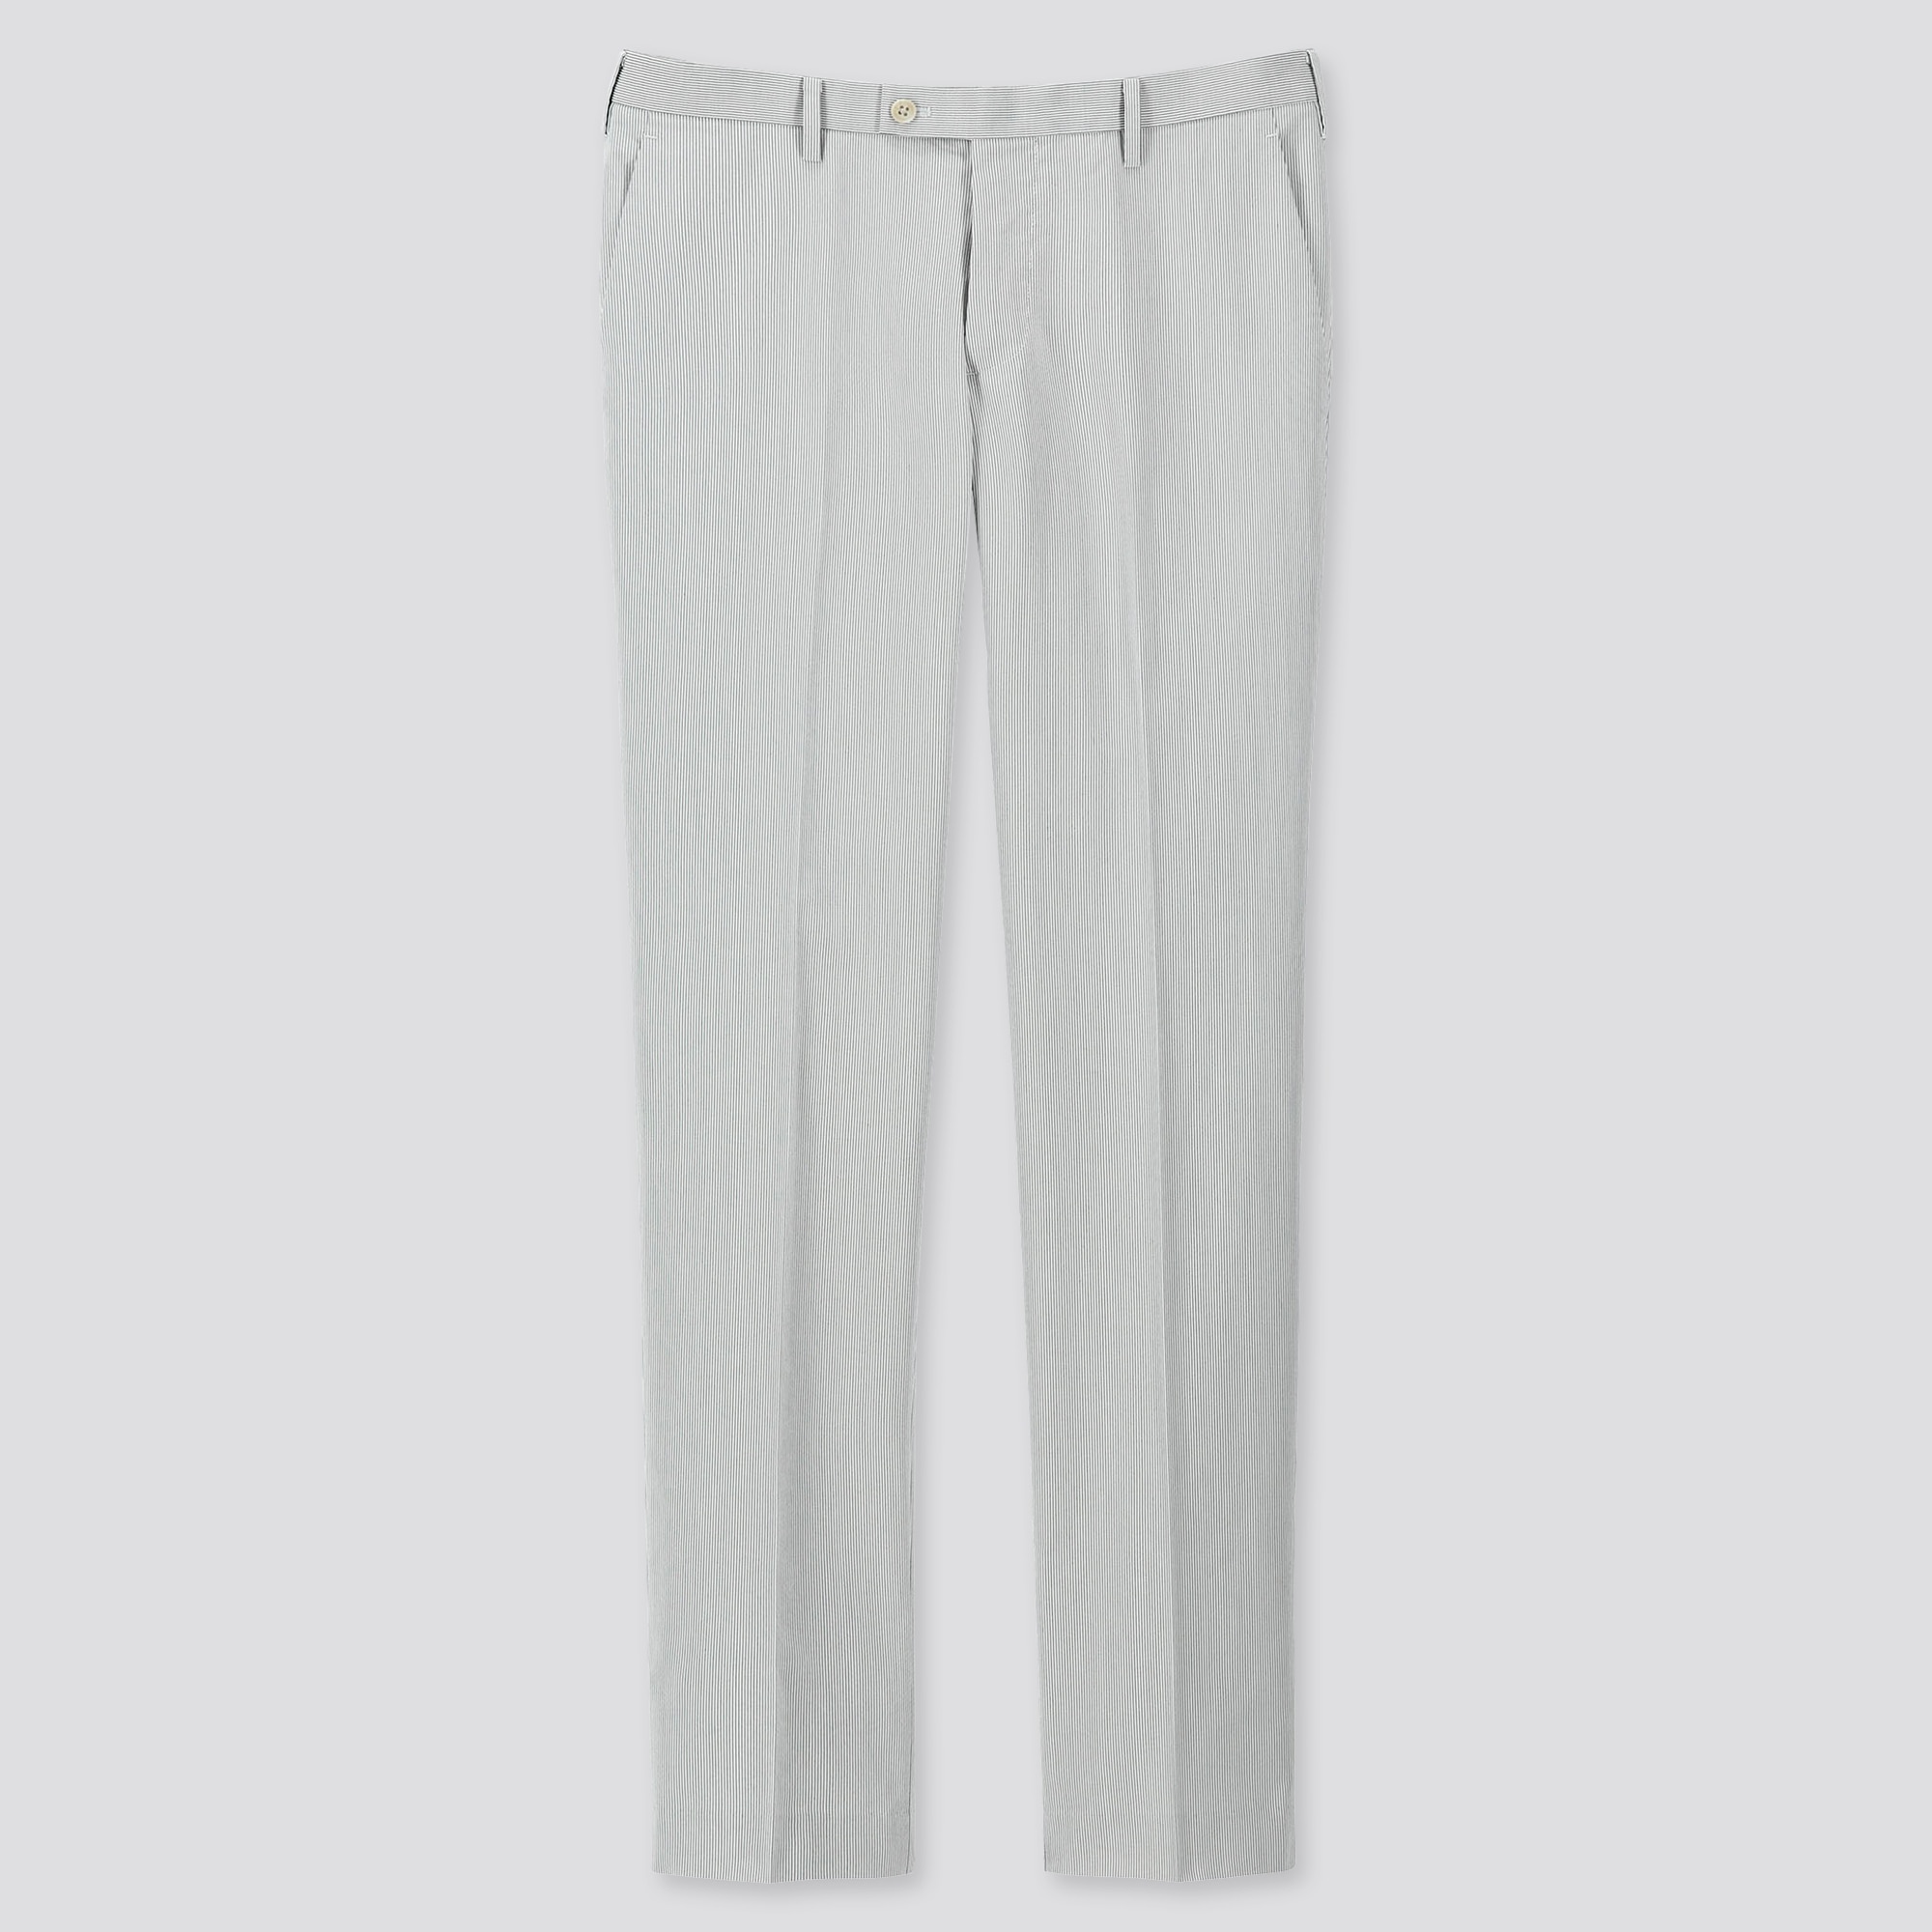 white and grey striped pants